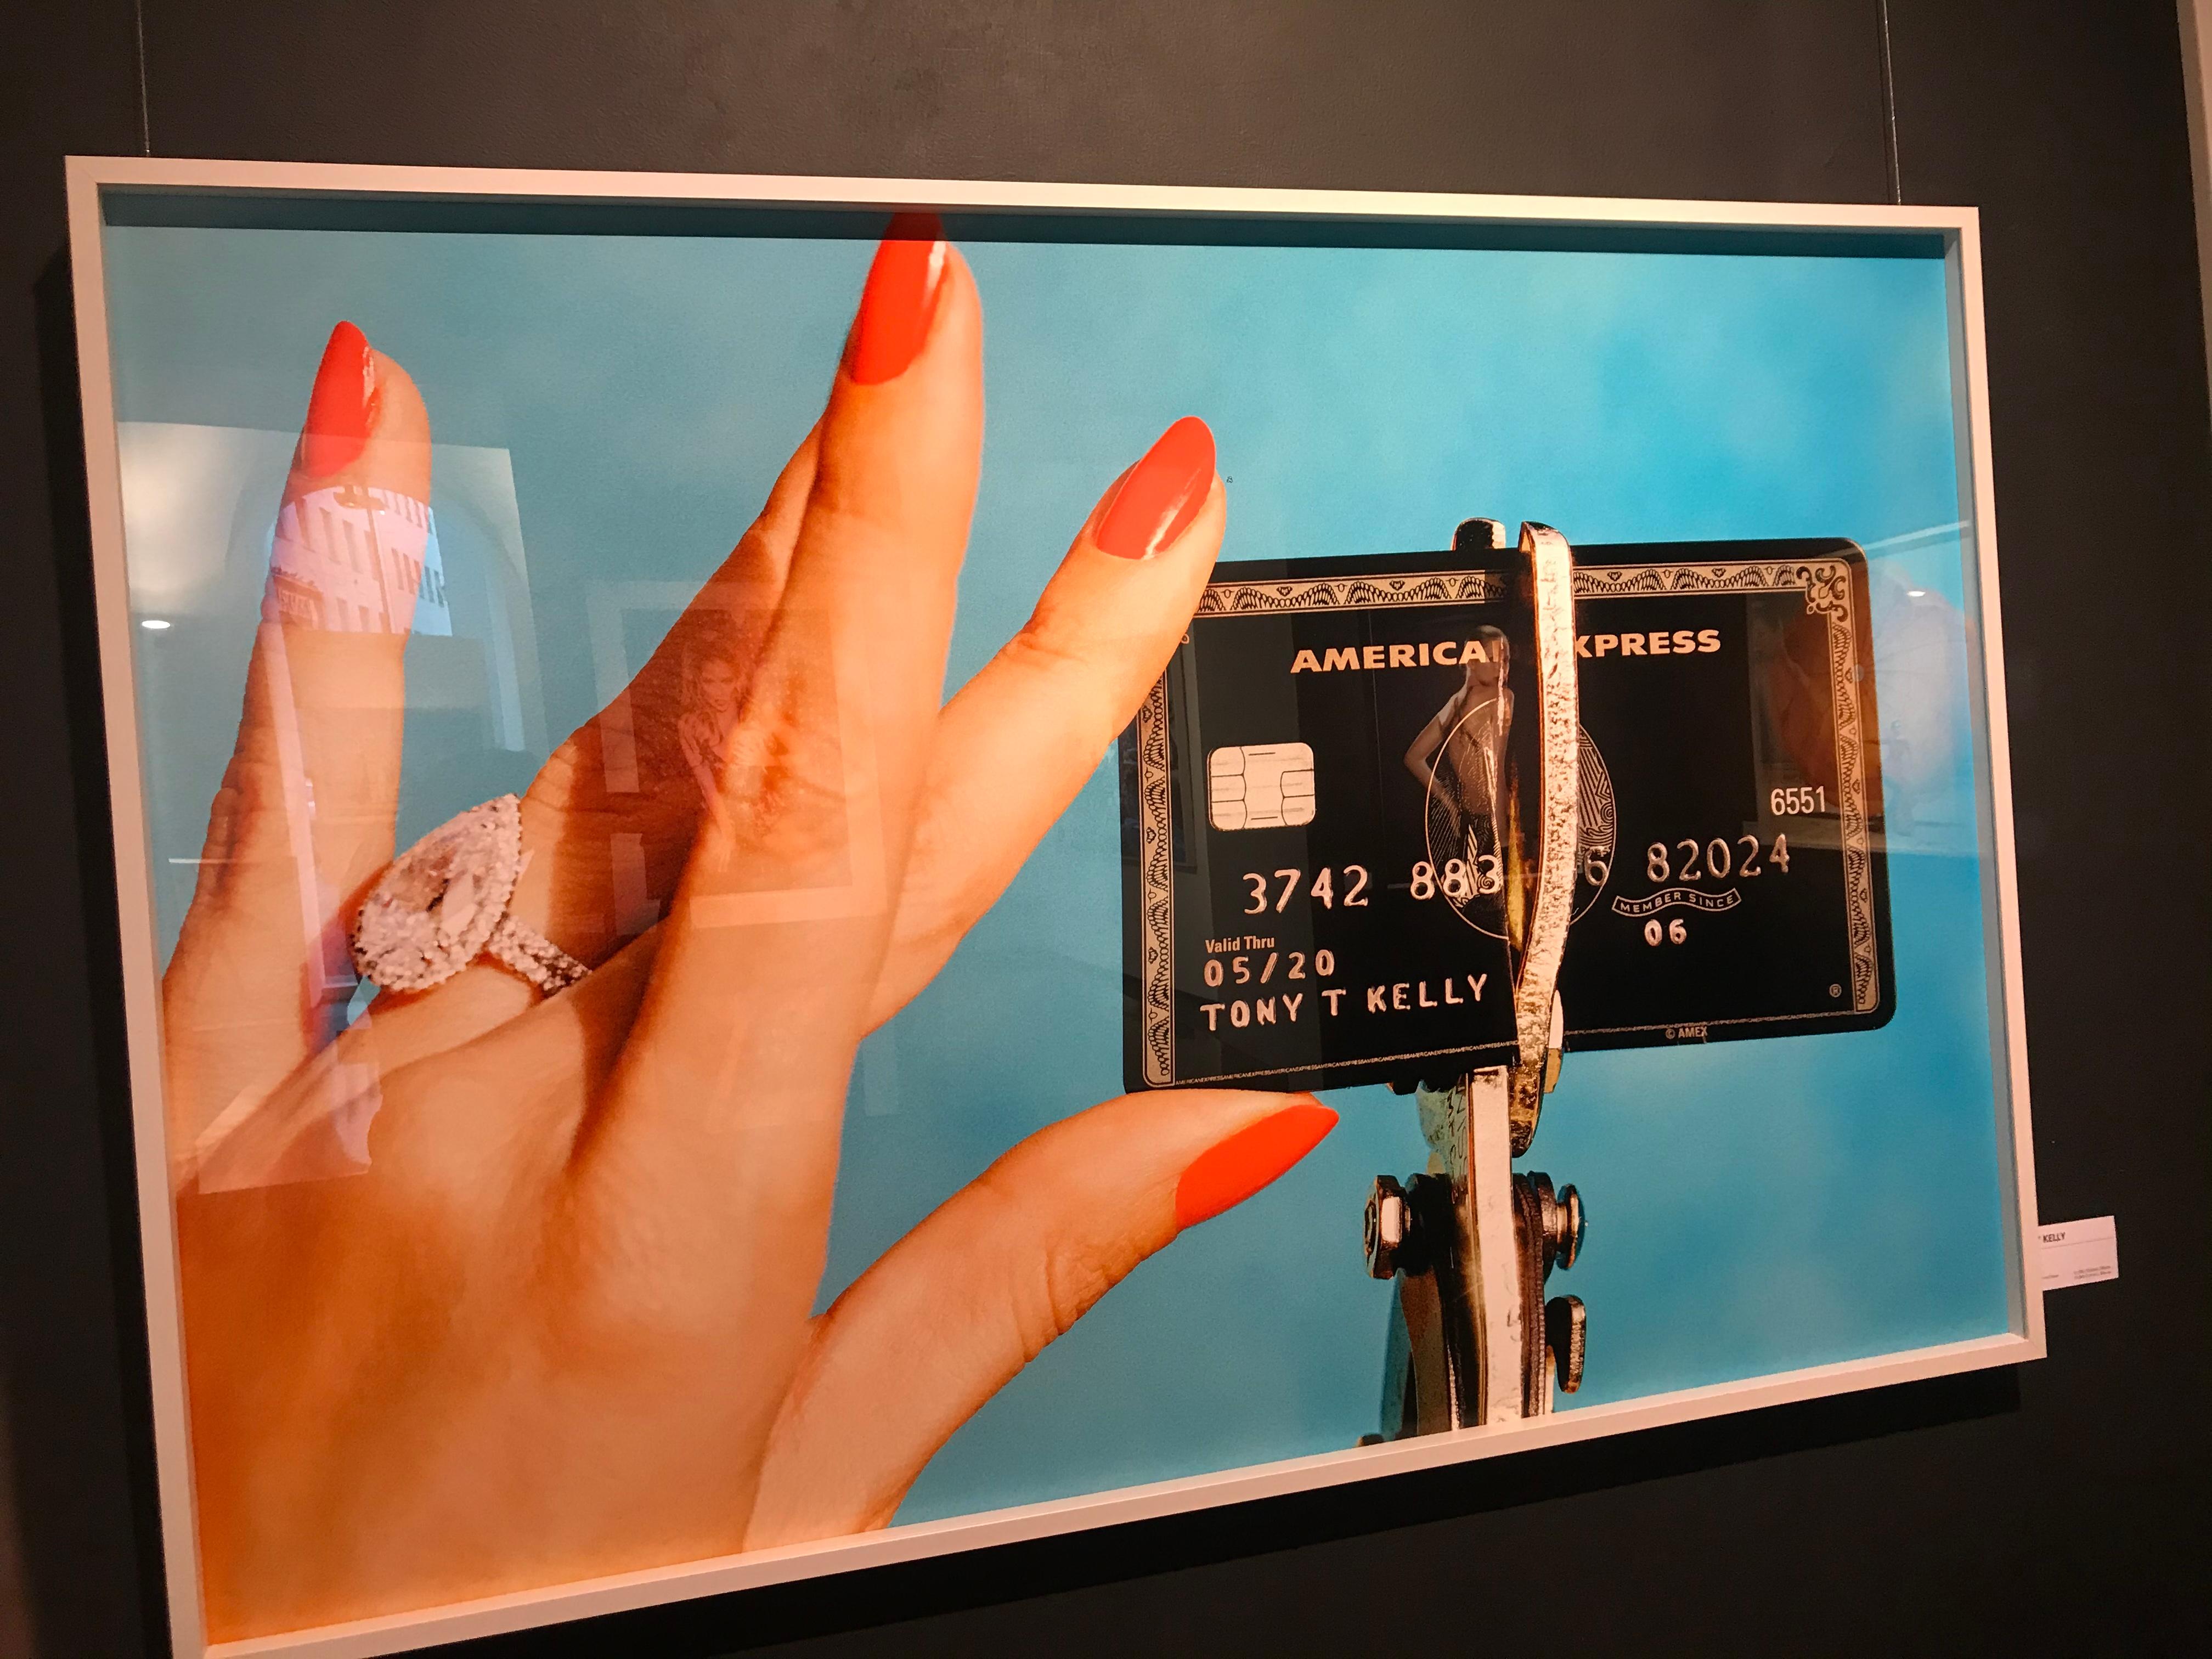 Unbreakable - portrait of hand with red fingernails destroying a credit card - Photograph by Tony Kelly